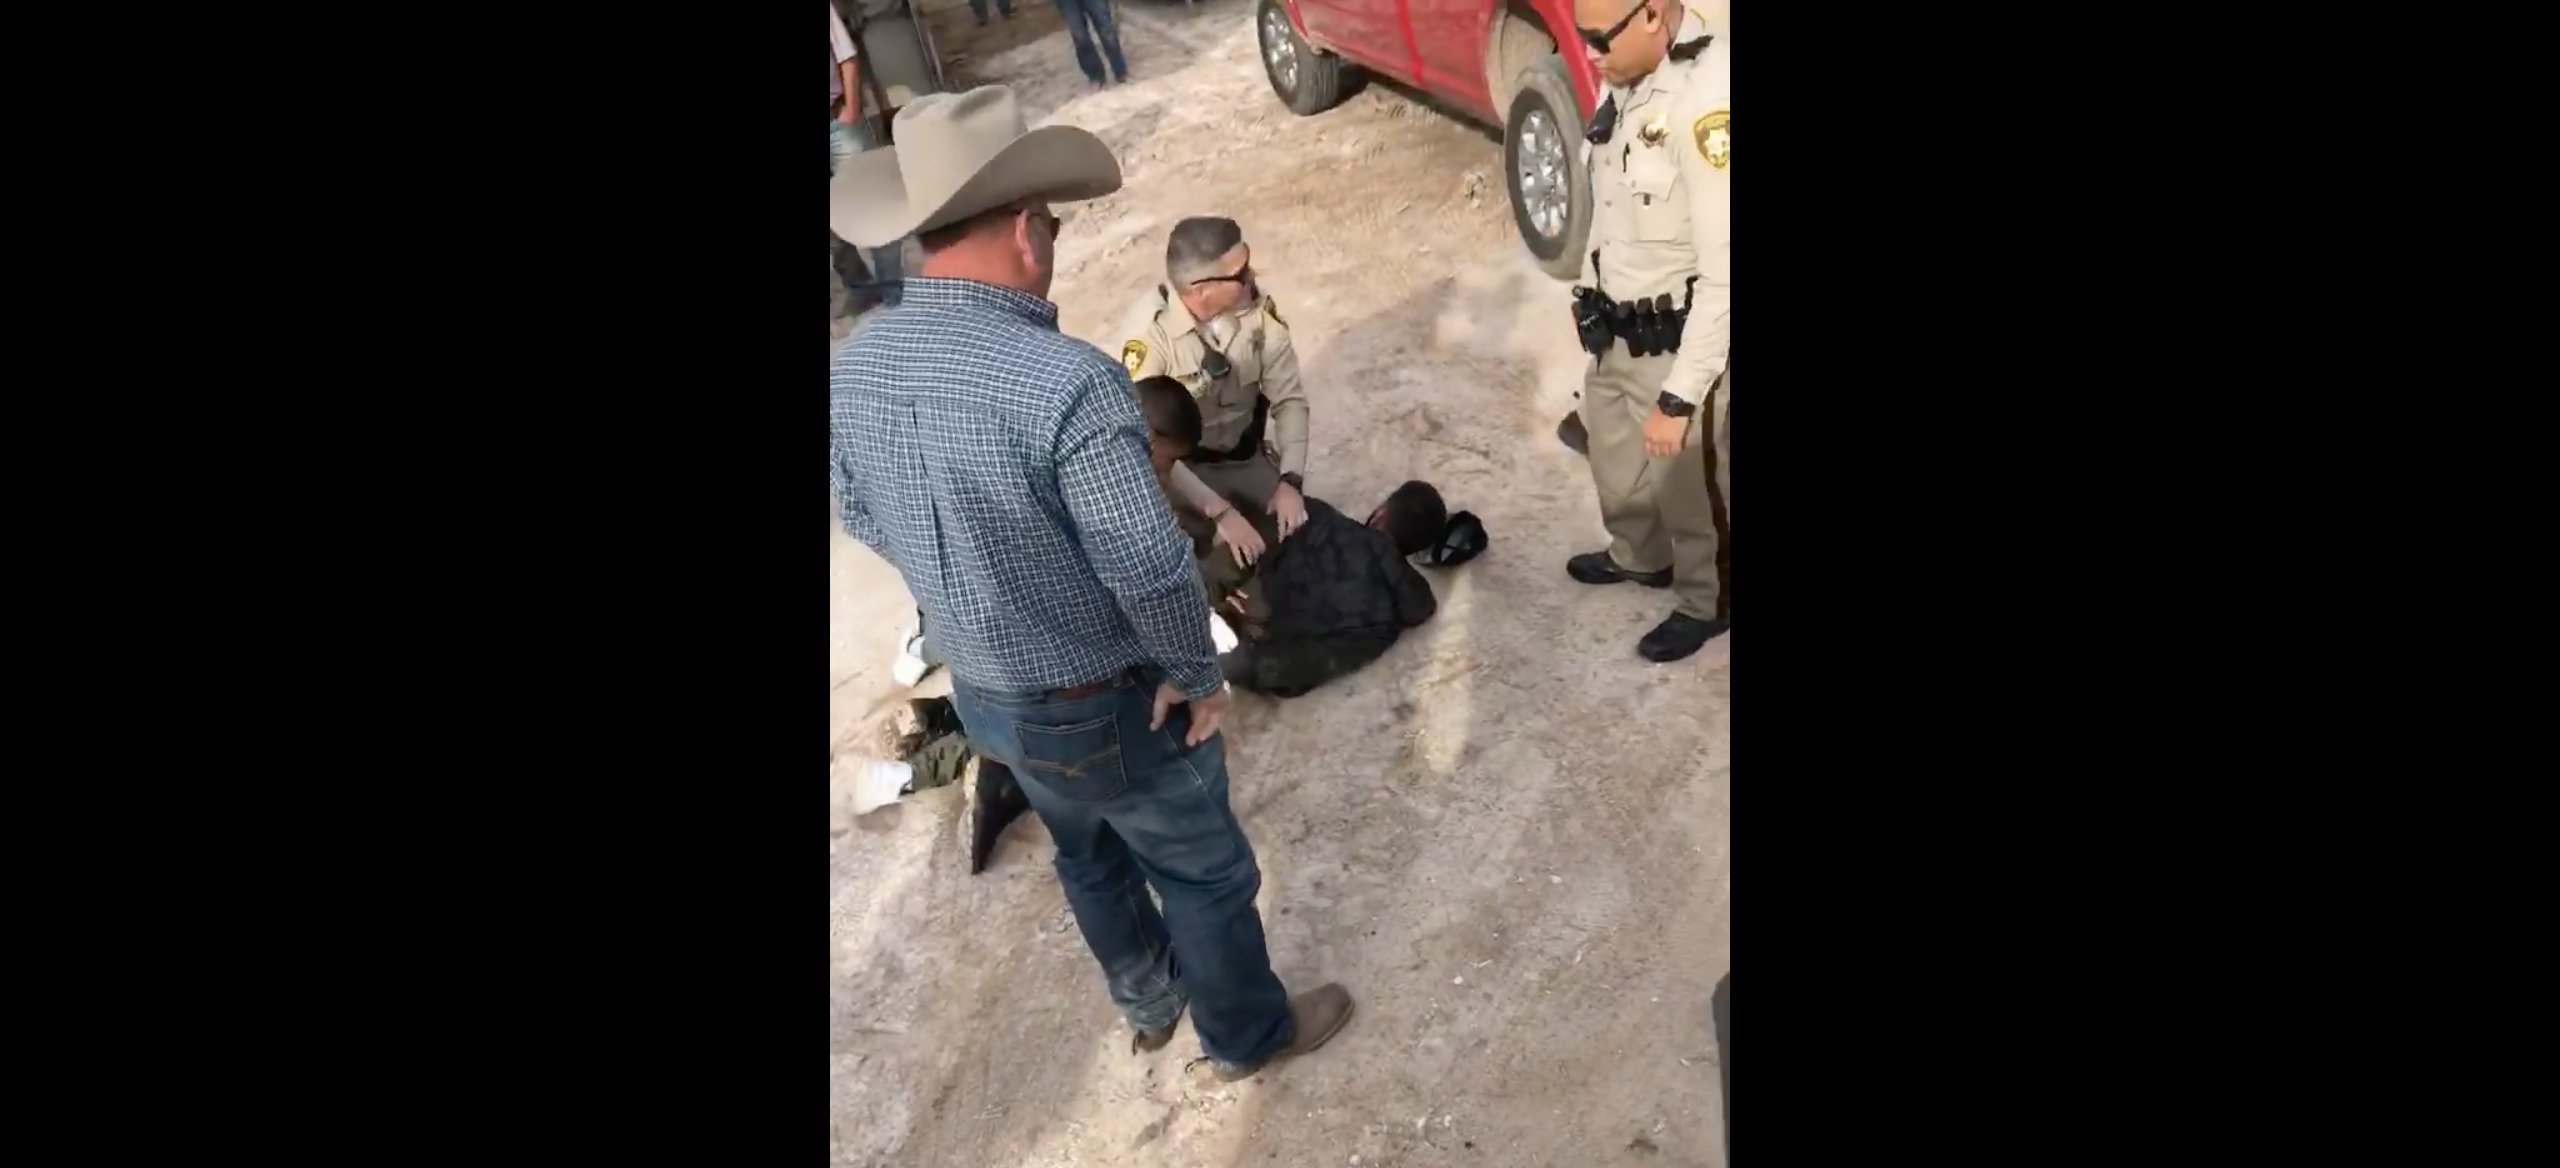 PHOTO: Video shows cowboys who helped arrested a carjacking suspect in Las Vegas.